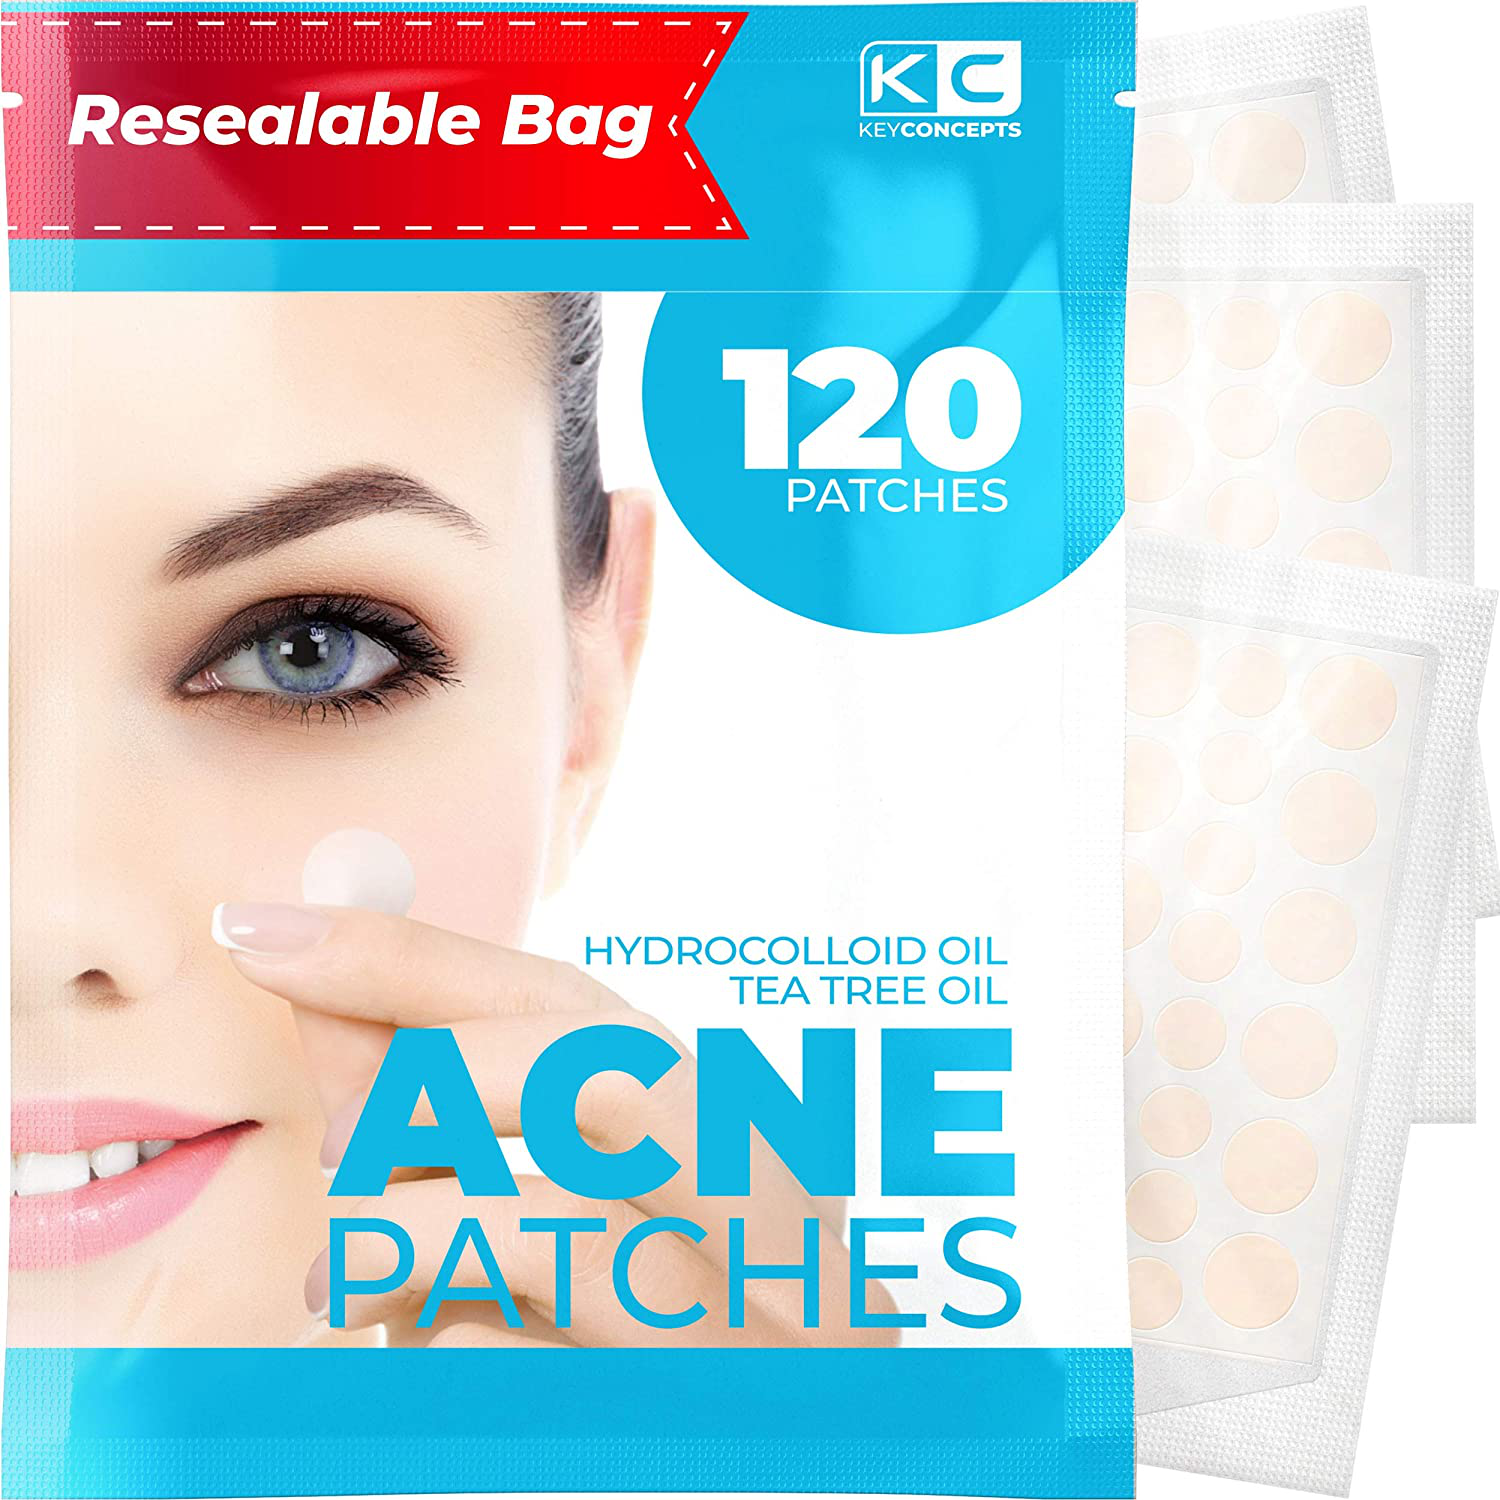 Acne Patches (120 Pack) - Tea Tree Oil and Hydrocolloid Acne Patches for Face (3 Sizes), Pimple Patch, Zit Patches, Acne Dots, Pimple Stickers, Natural Blemish and Acne Spot Dots